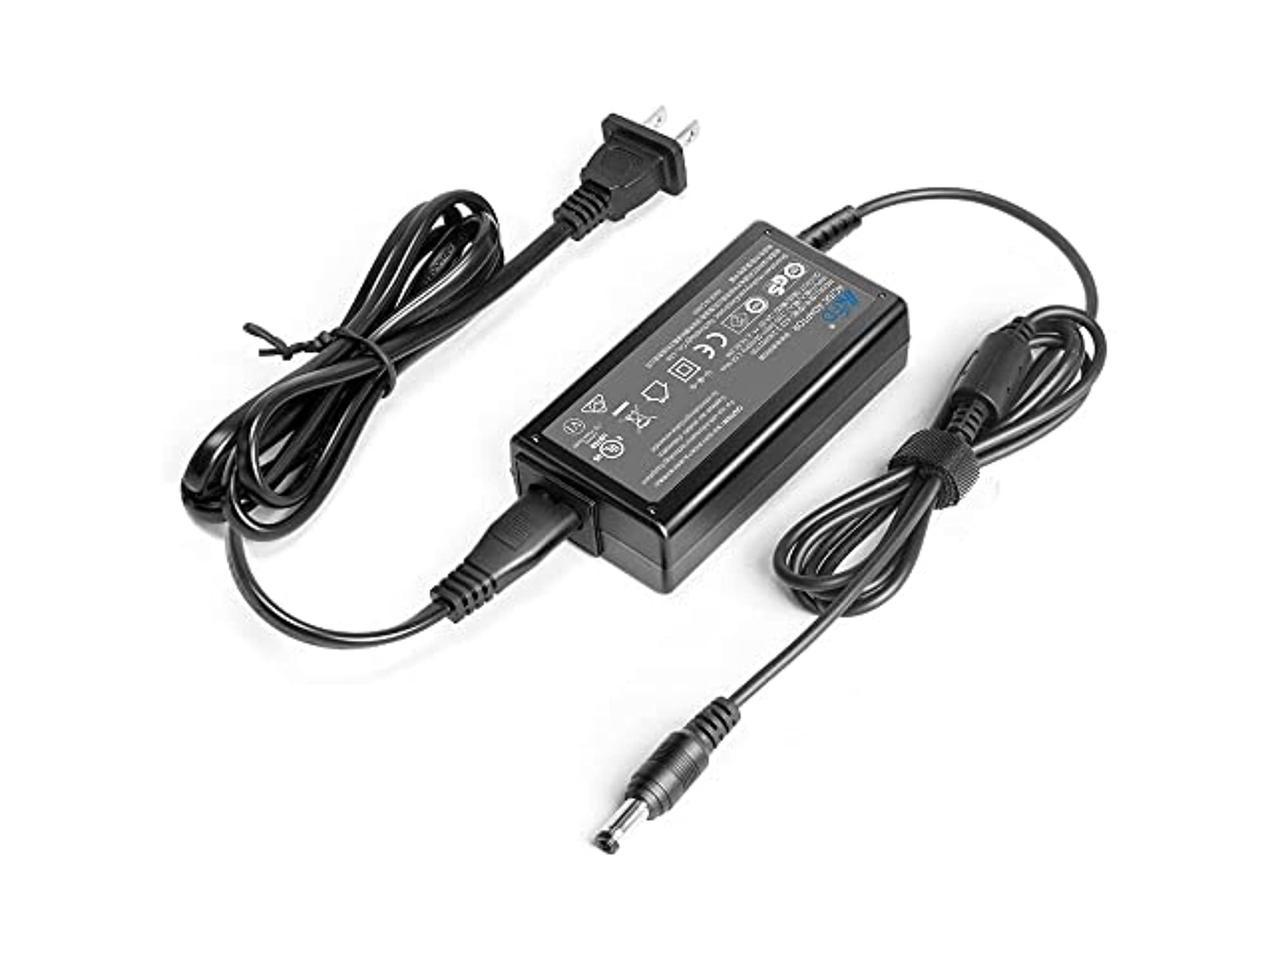 PPJ 24V AC/DC Adapter for Logitech G25 G27 G29 G920 190211-0010 190211-A030 ADP-18L R33030 G940 APD DA-42H24 PS3 Xbox 360 Driving Force GT Racing Wheel 24VDC Power Supply Battery Charger 